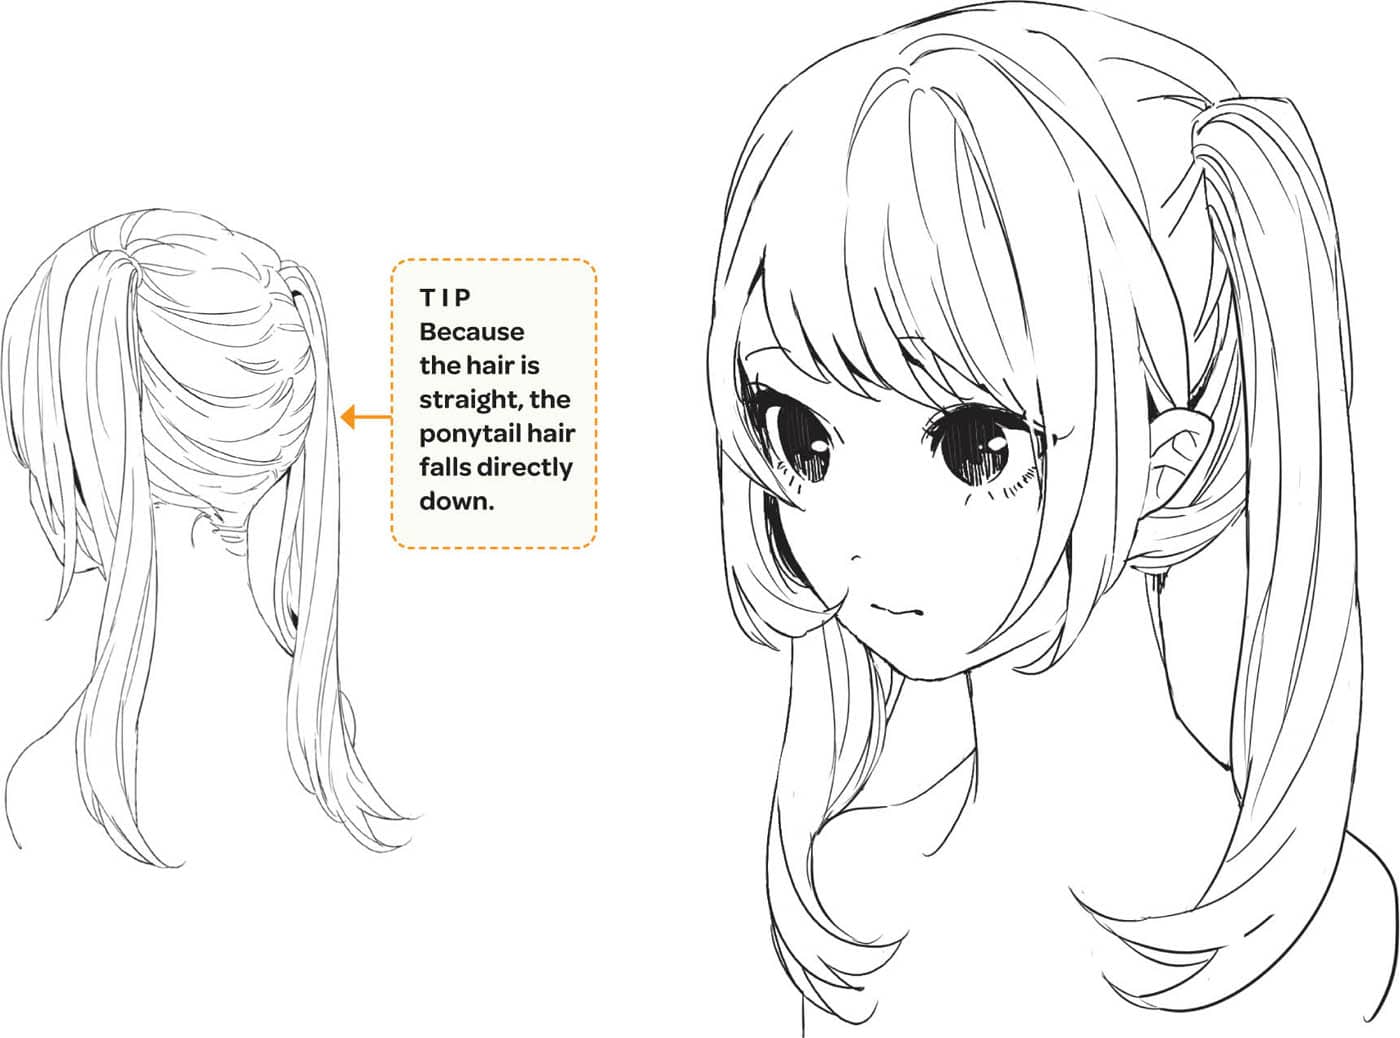 TIP Because the hair is straight, the ponytail hair falls directly down.